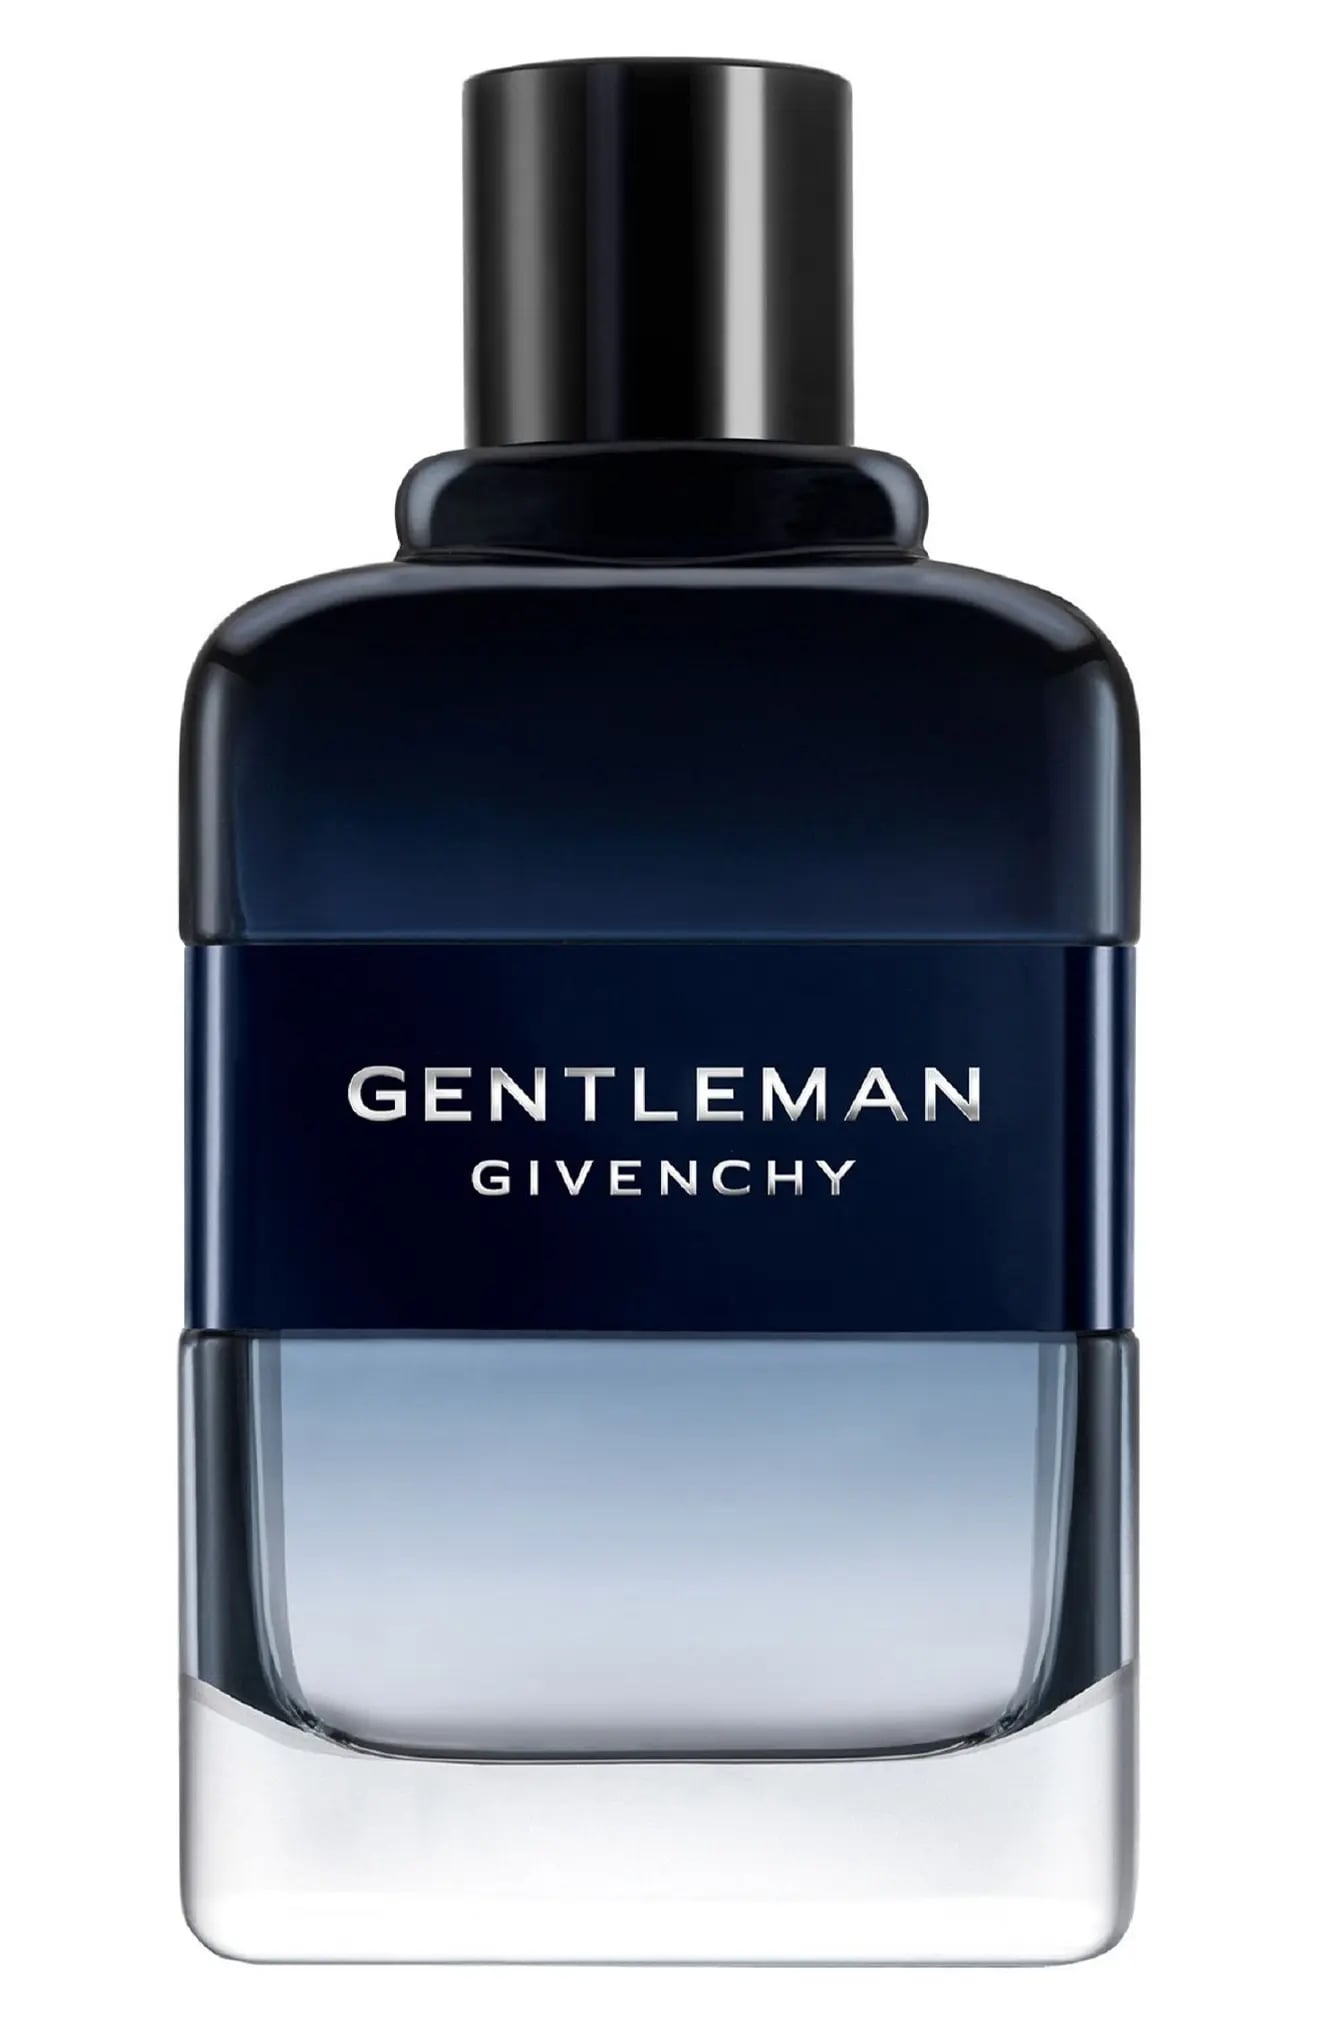 Gentleman Intense EDT Spray Perfume for Men by Givenchy